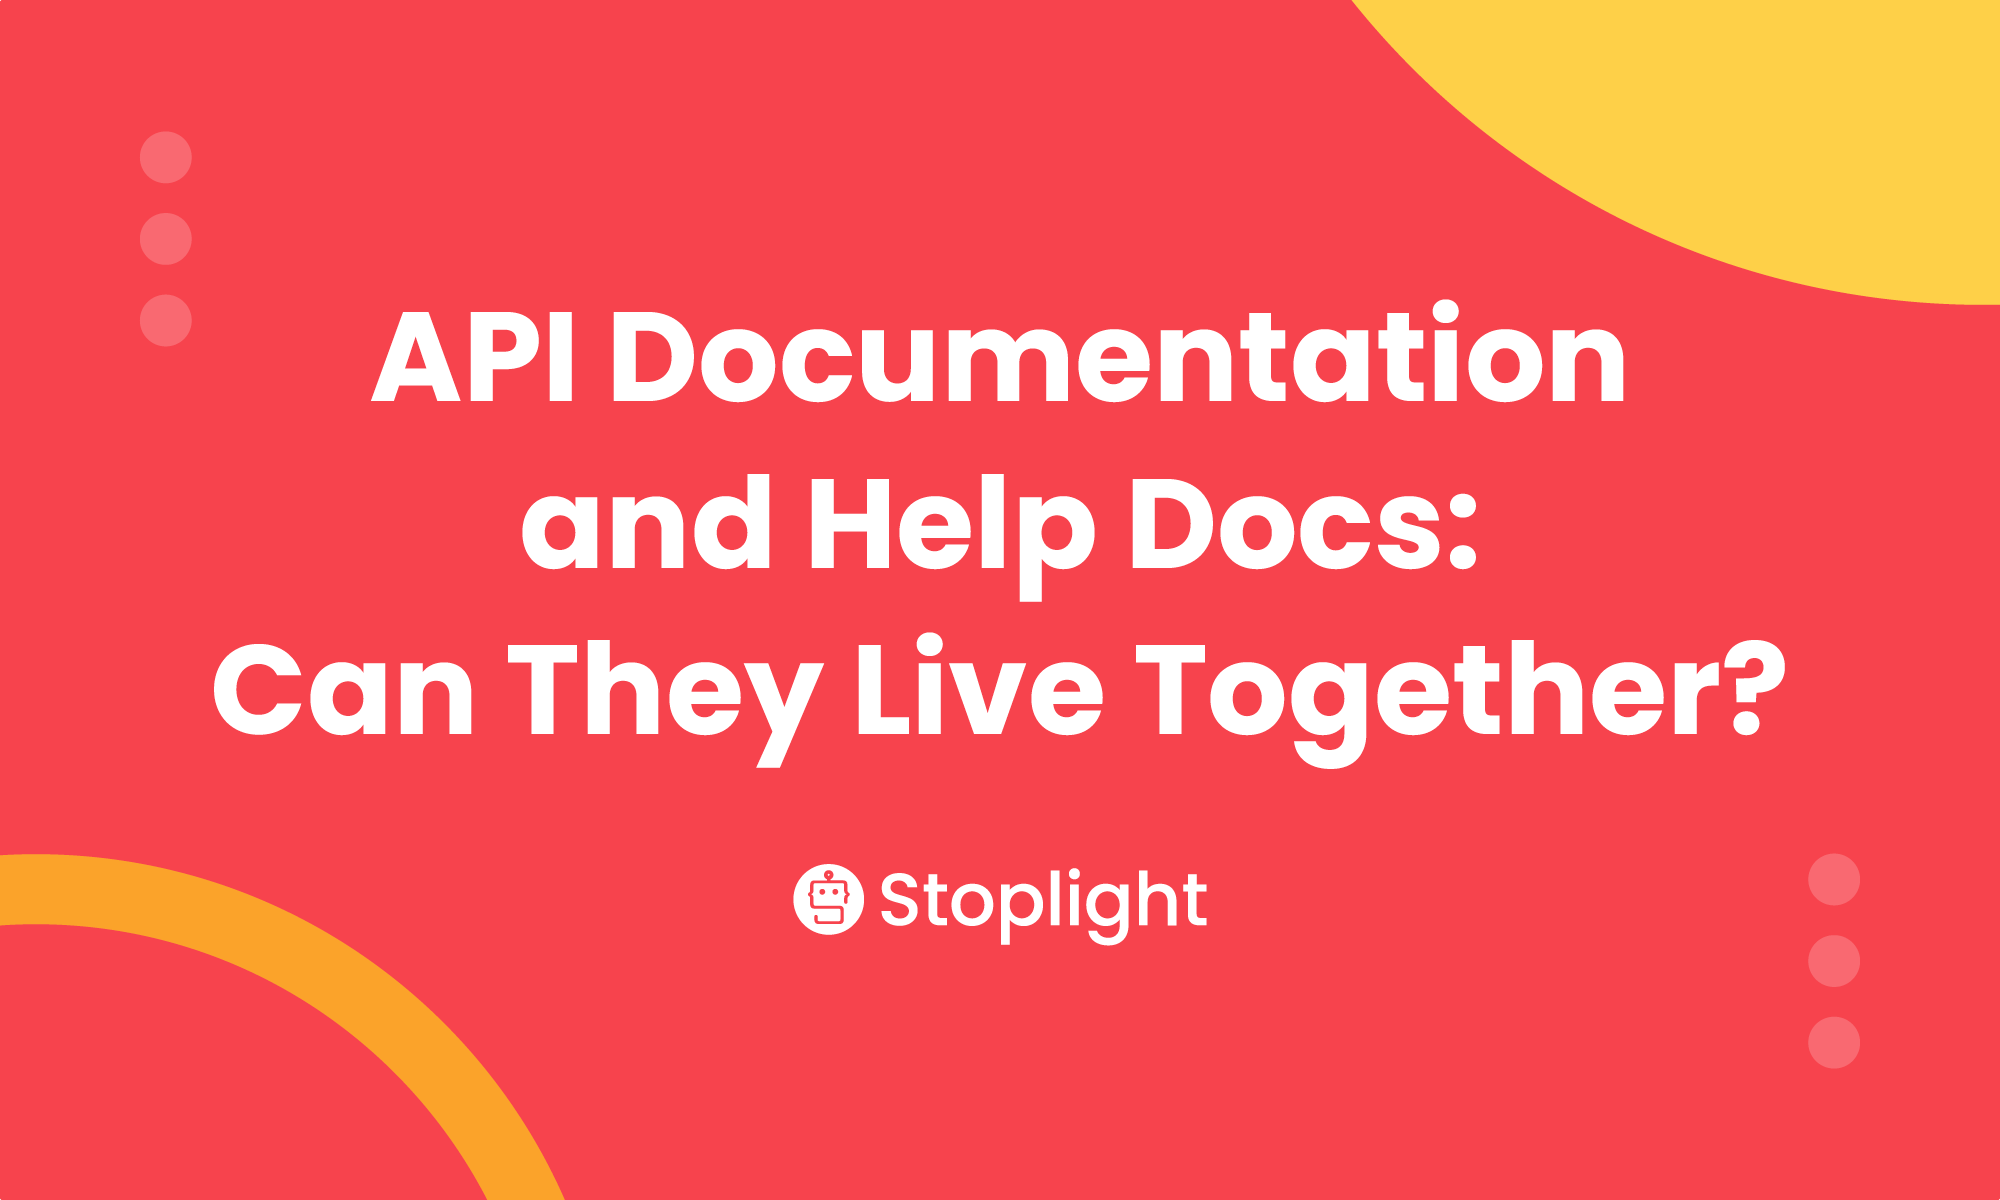 API Documentation and Help Docs: Can They Live Together?